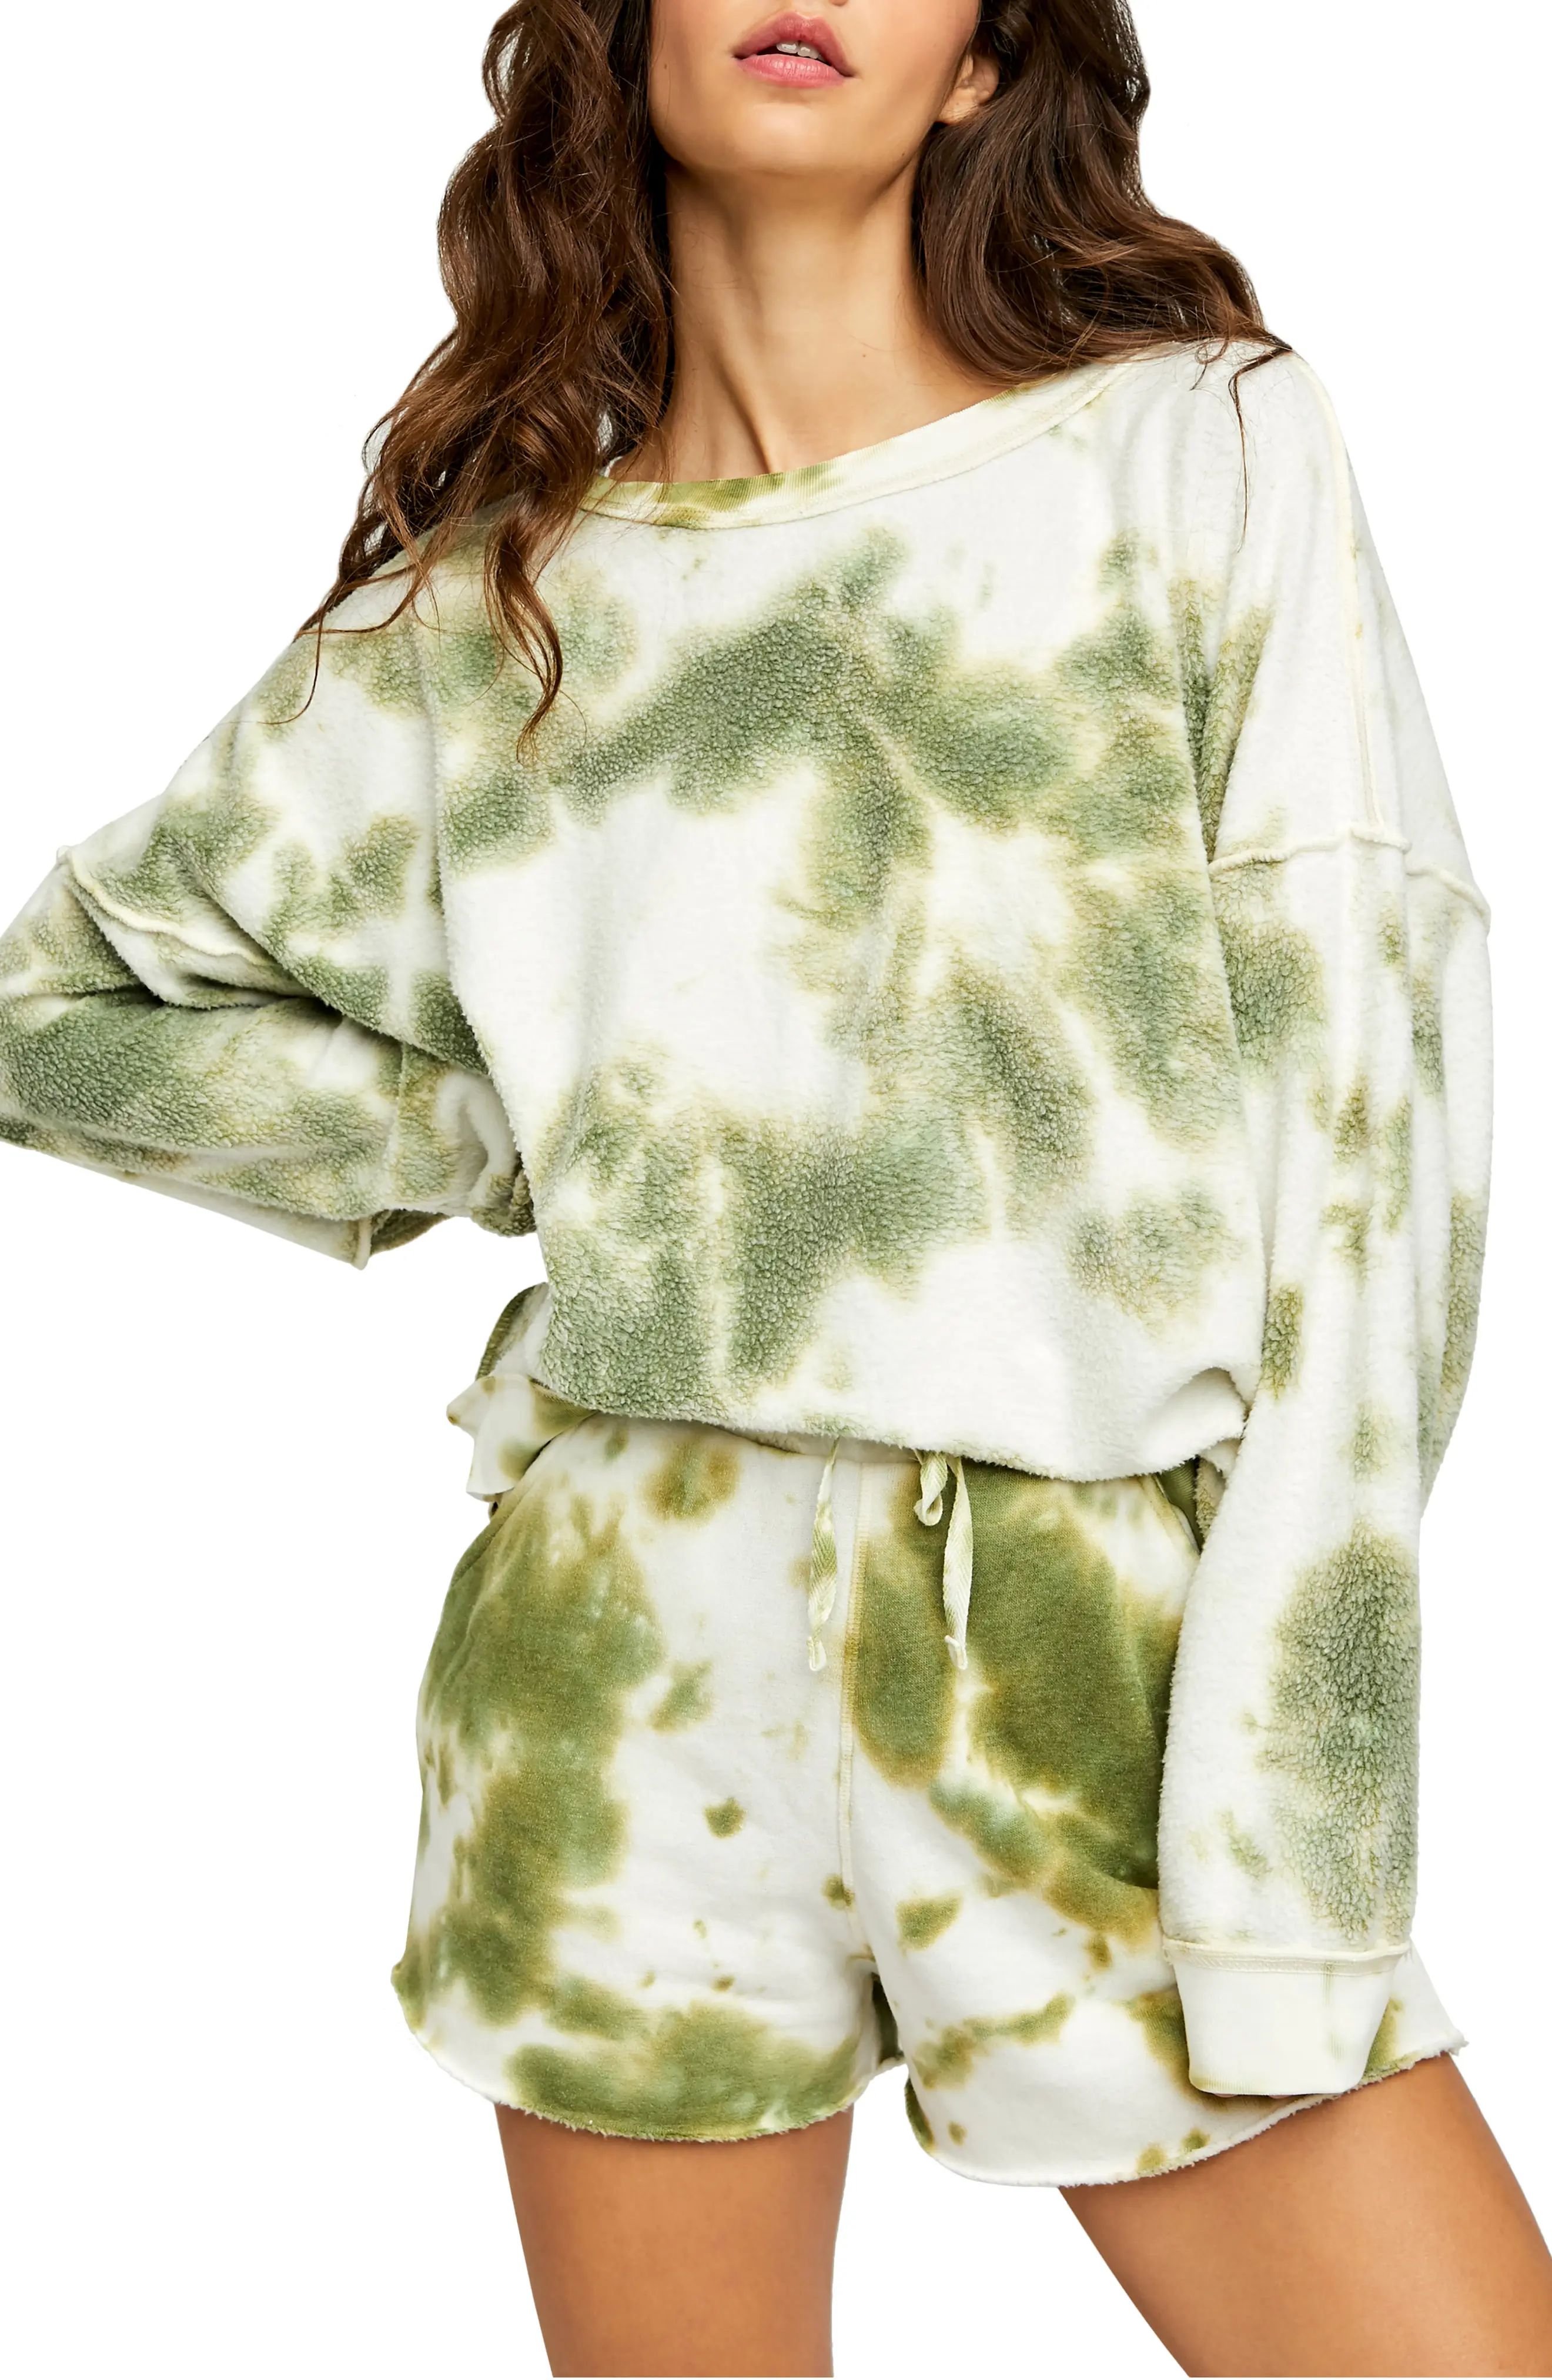 Women's Free People Kelly Washed Tie Dye Set, Size Small - Green | Nordstrom